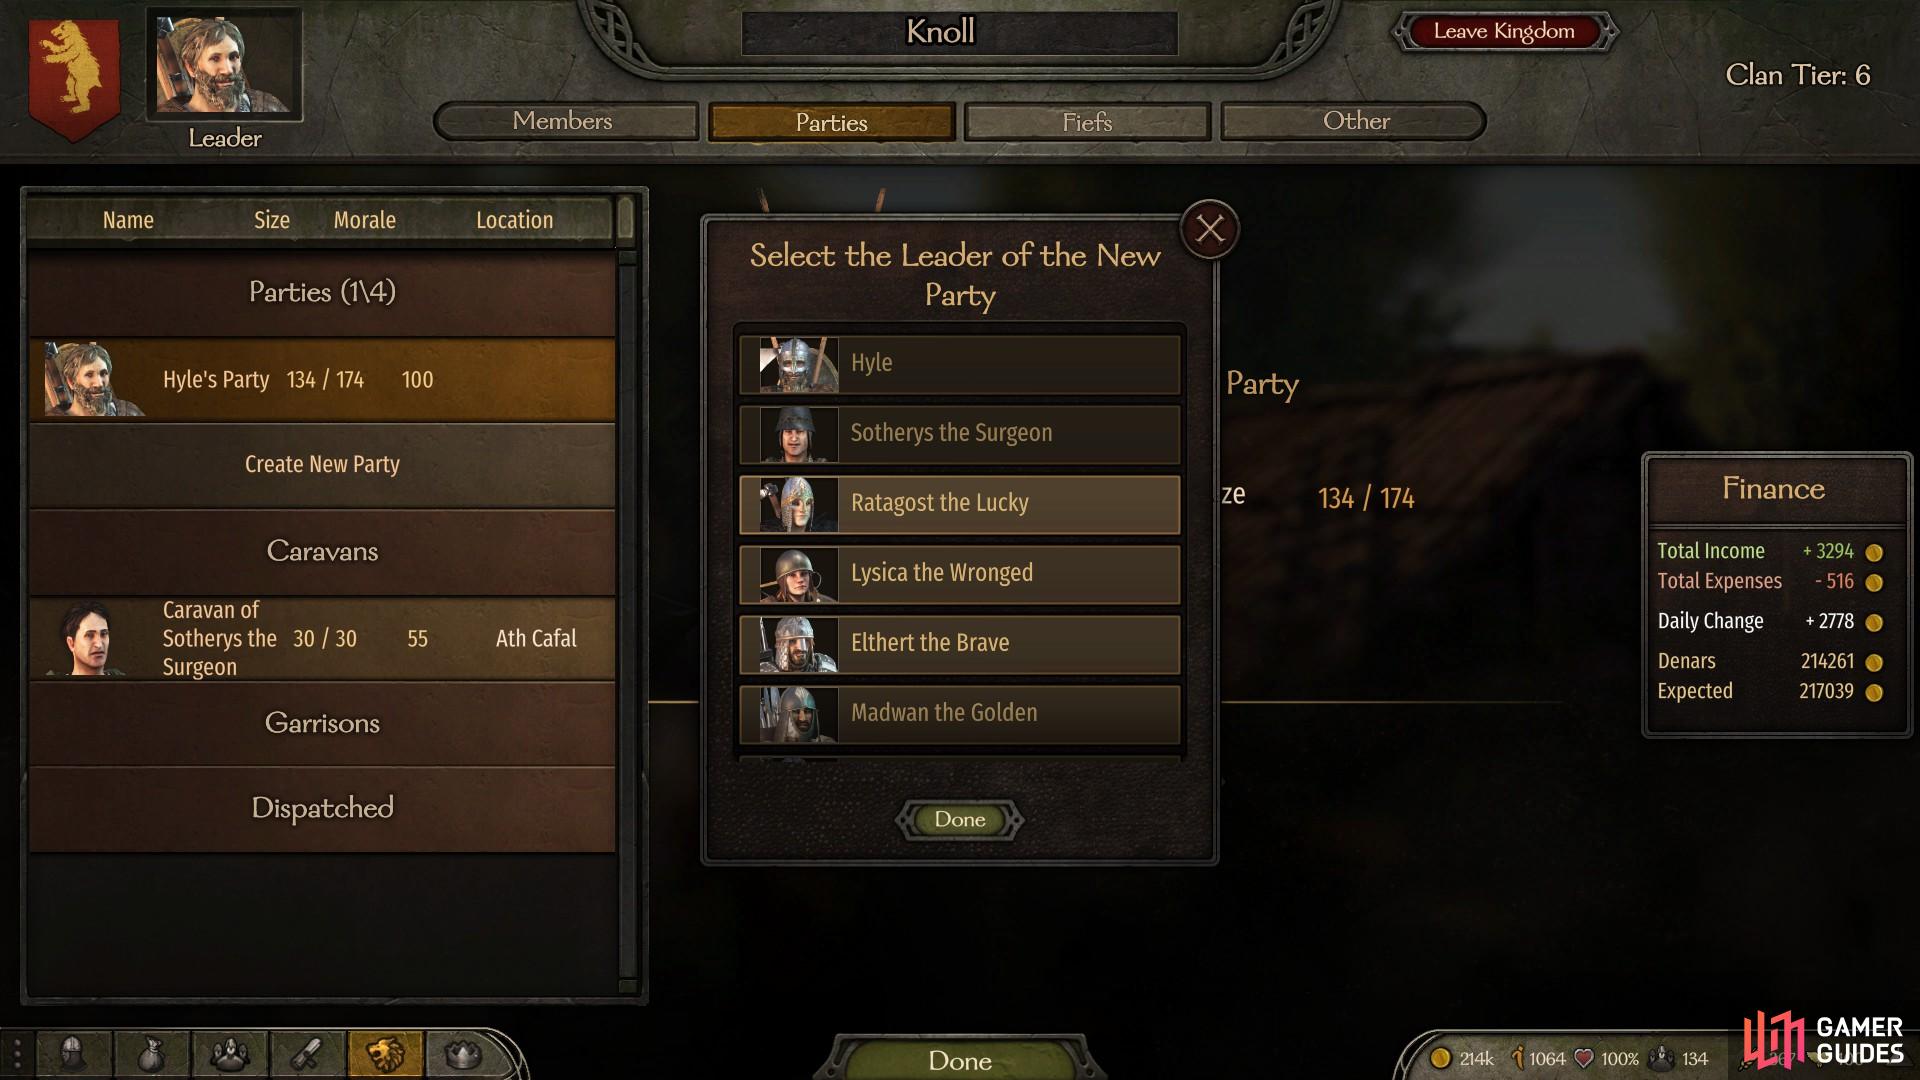 Select the 'Parties' tab in your clan menu to choose a companion that will lead a new party.